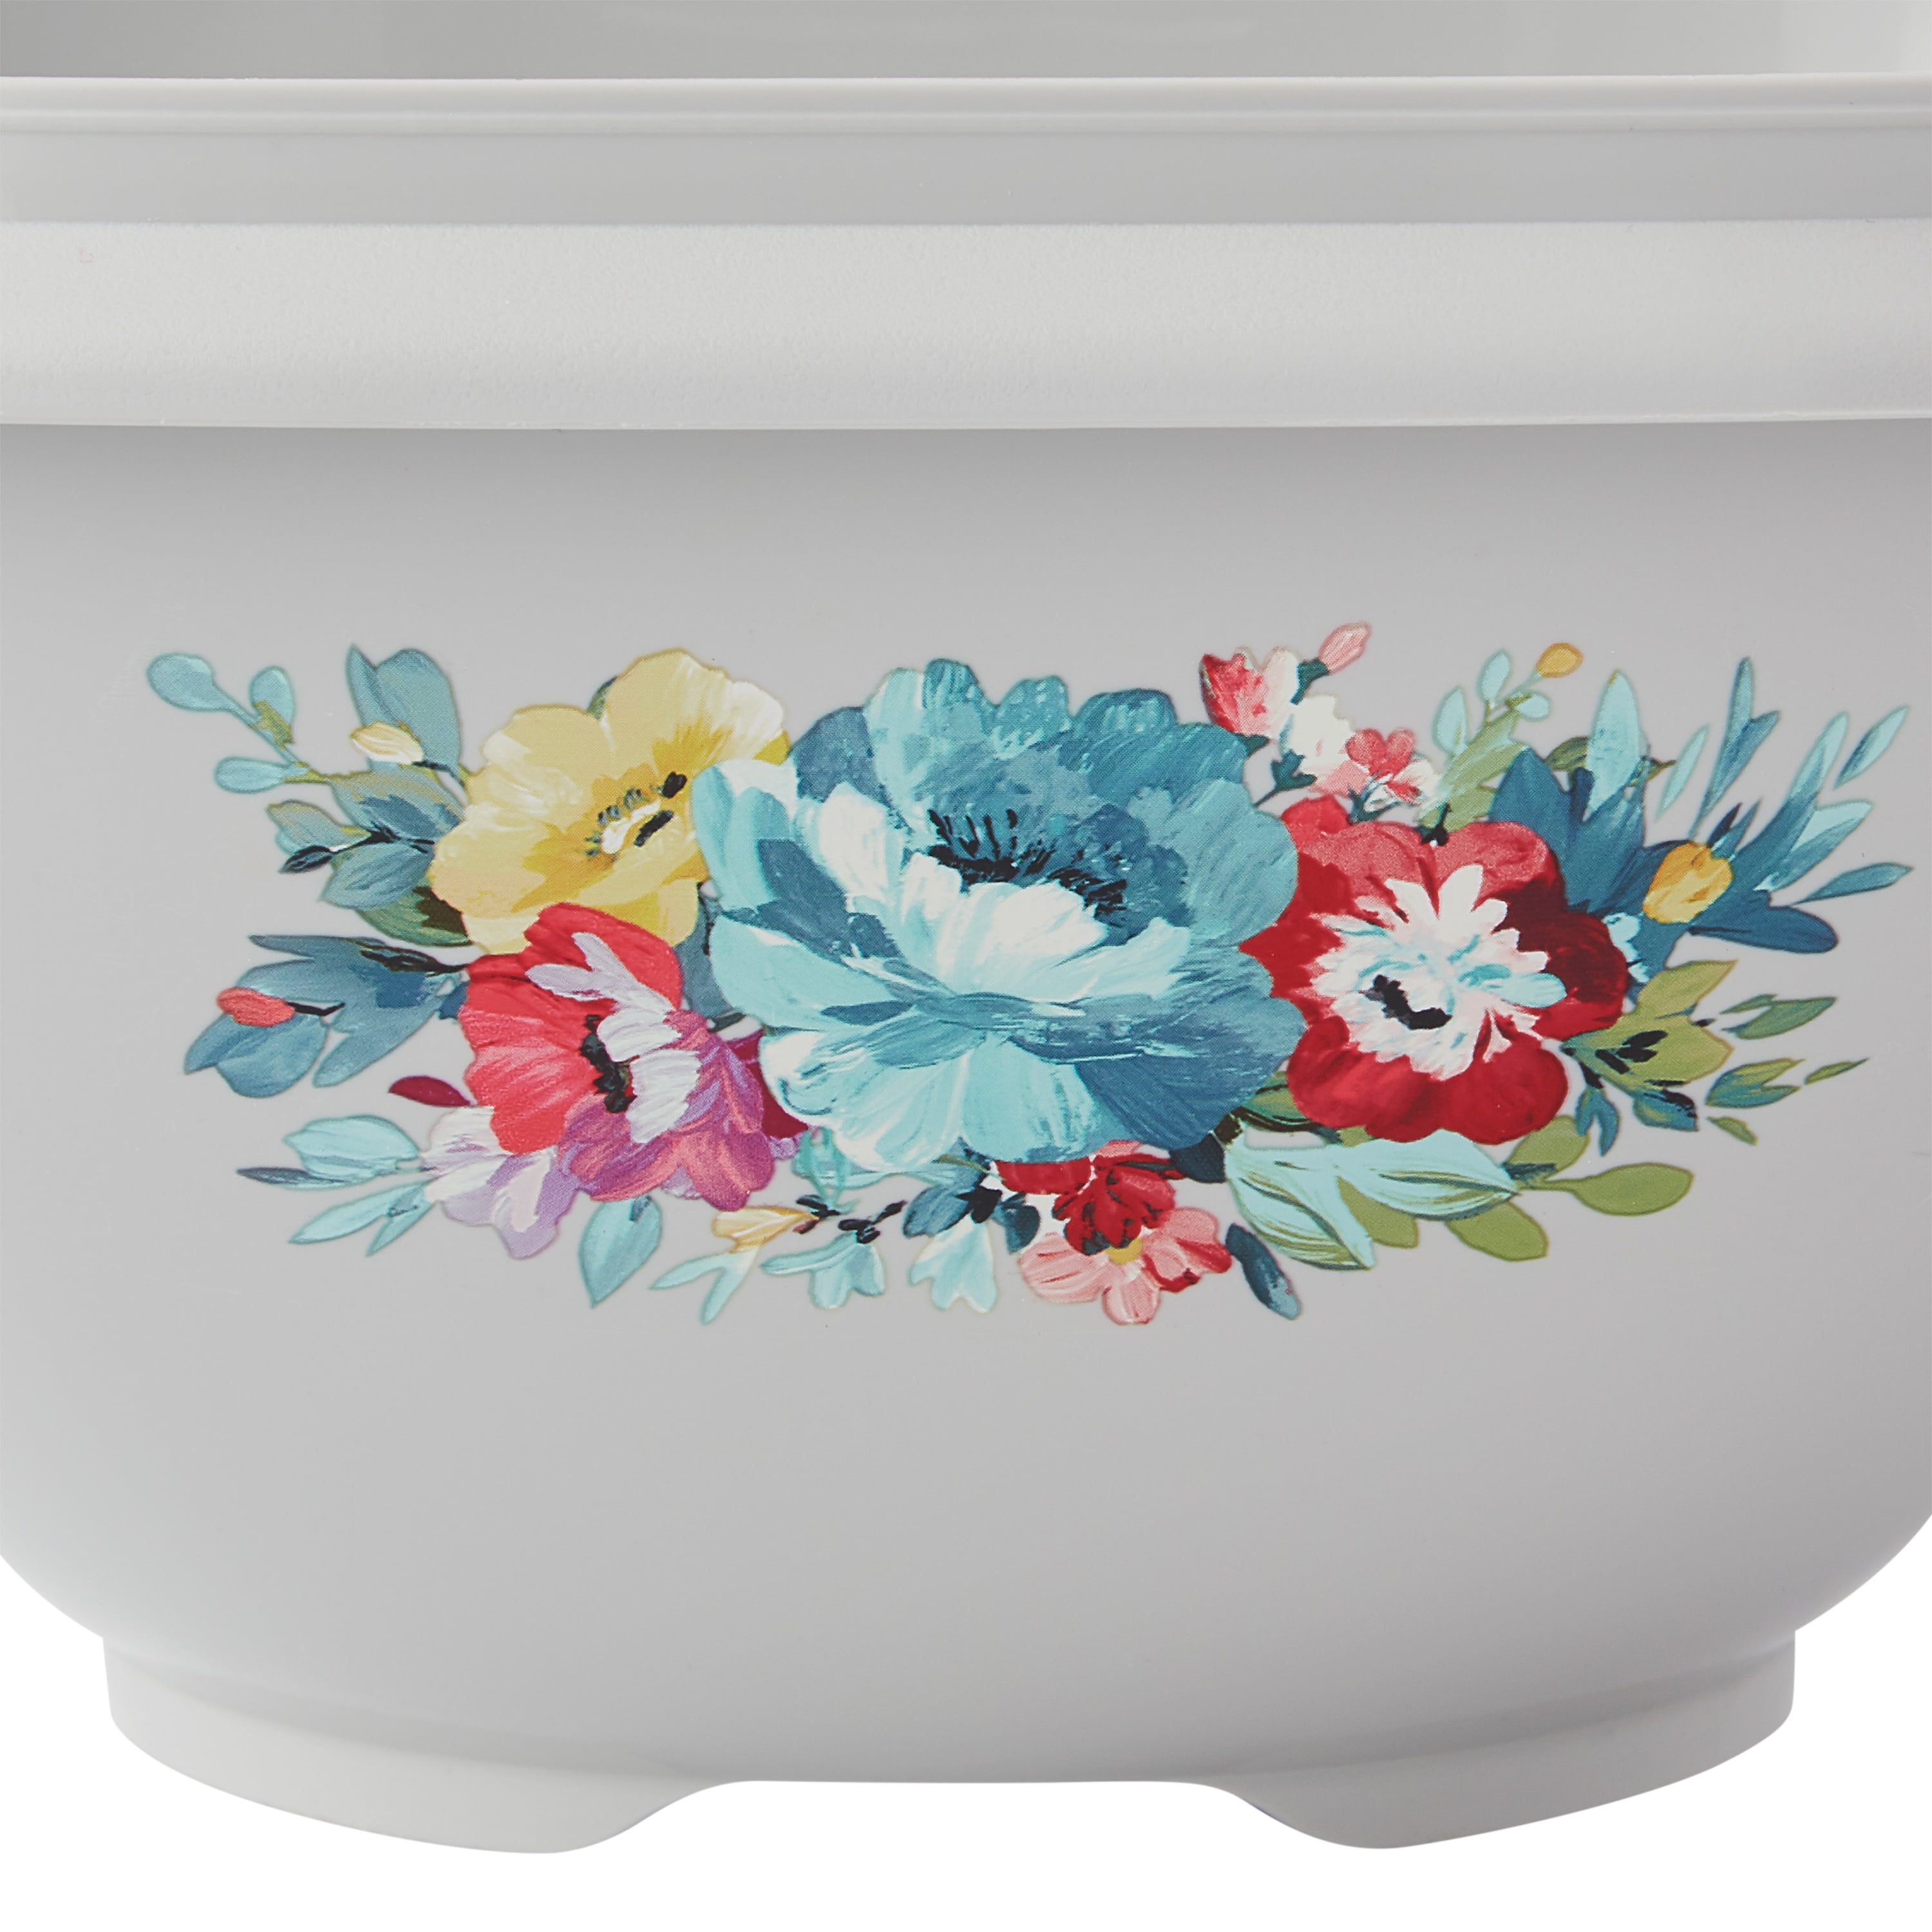 The Pioneer Woman Food Storage at Walmart - Where to Buy Ree Drummond's  Storage Container